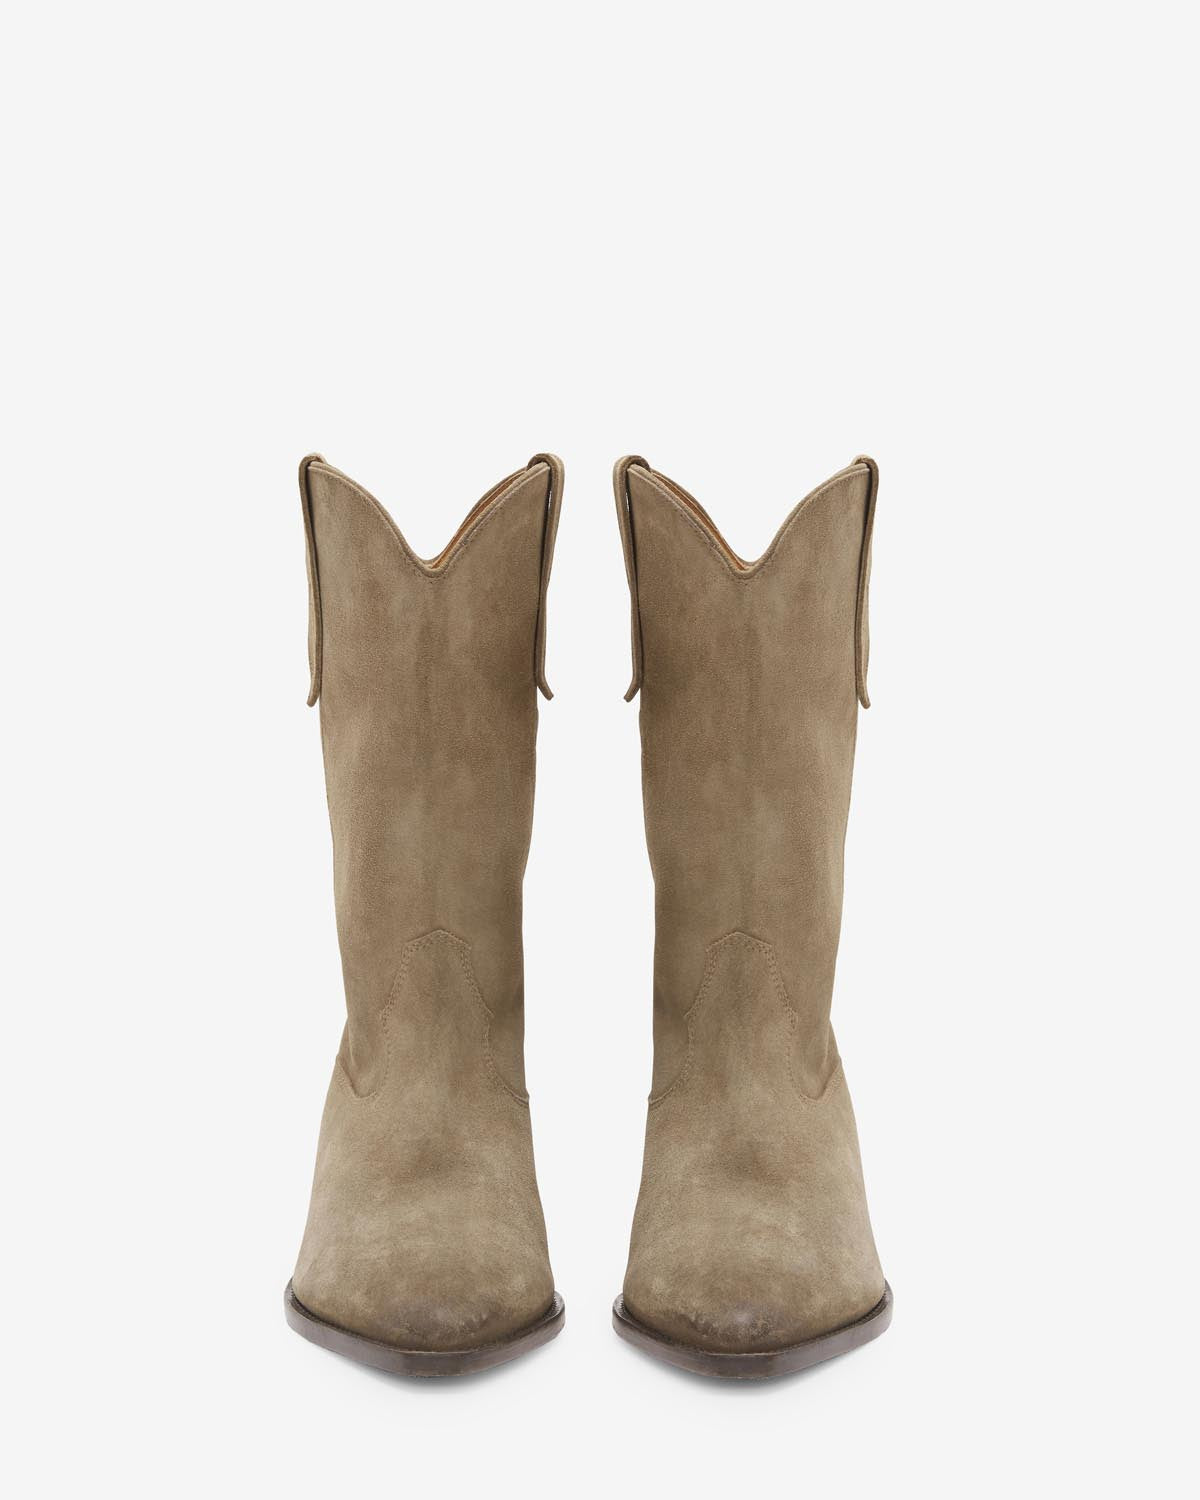 Duerto cowboy boots Woman Taupe 2